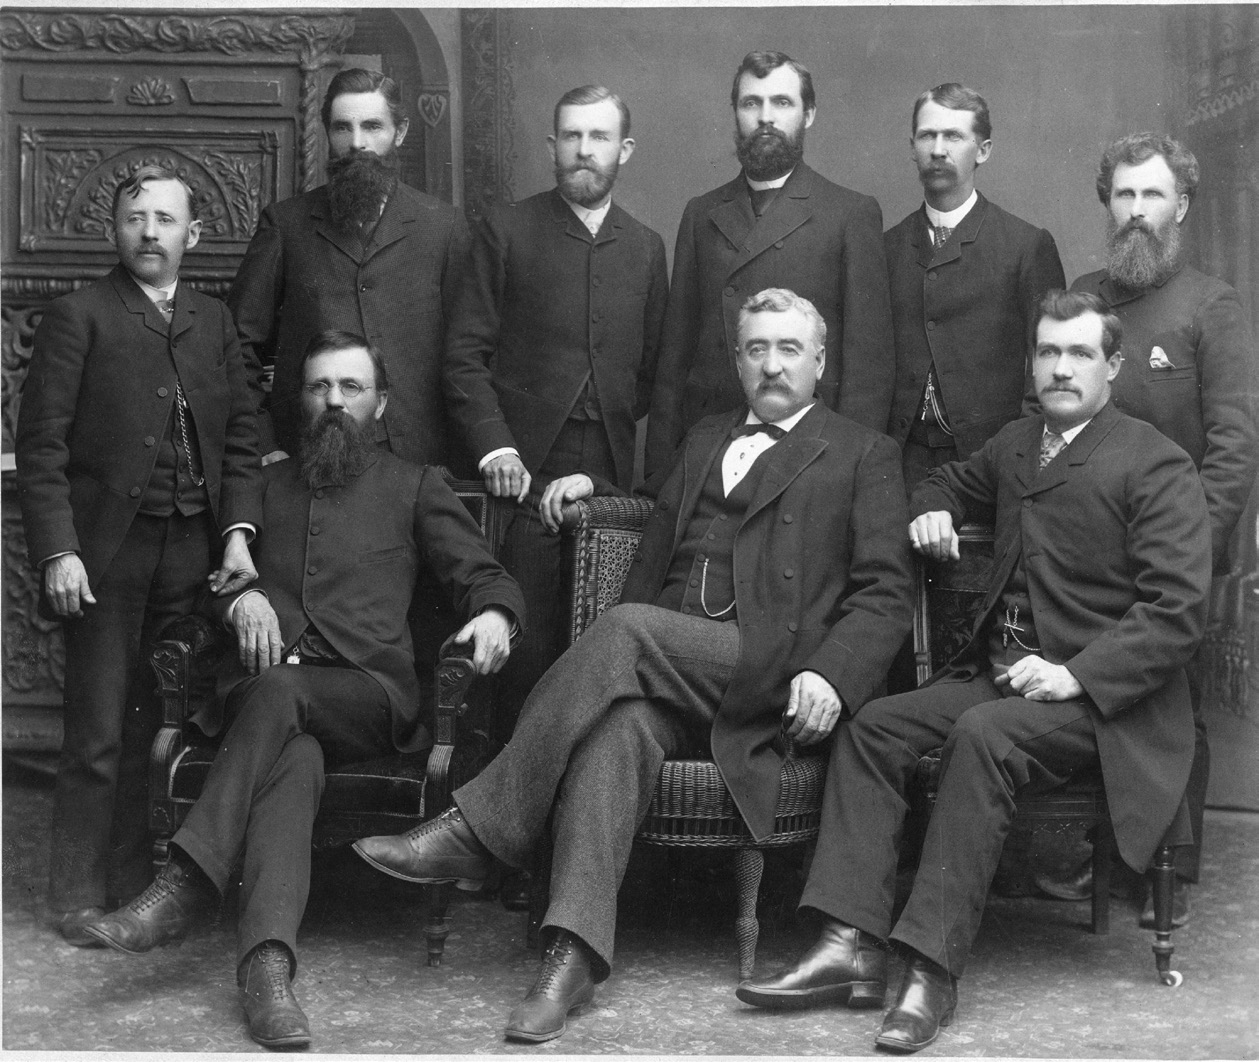 Municipal Officers of Ogden, Utah, 1889. At the height of anti-polygamy persecution in 1889, the people of Ogden elected Liberal Party officers for the first time. The same would happen in Salt Lake City the following year. 1889 photo by the Adams Bros. courtesy of Church History Library